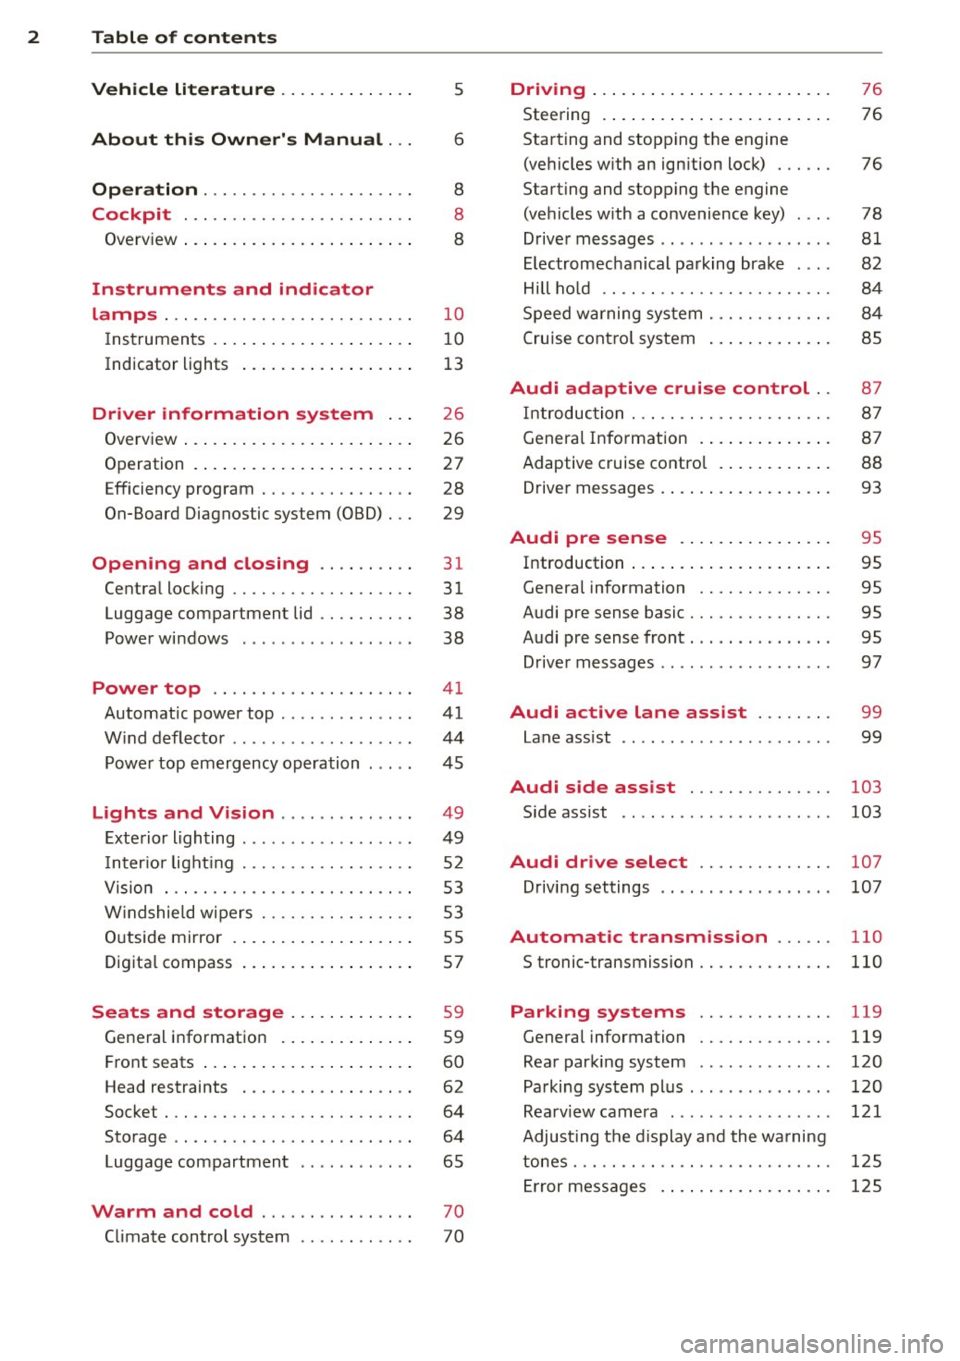 AUDI A3 CABRIOLET 2015  Owners Manual 2  Table  of  contents Vehicle  literature  .. .. .. .. .. ... . 
About  this  Owners  Manual  ... 
Operation  .............. .... ...  . 
Cockpit  ... ............. .... .. . . 
Ove rv iew  ... ... 